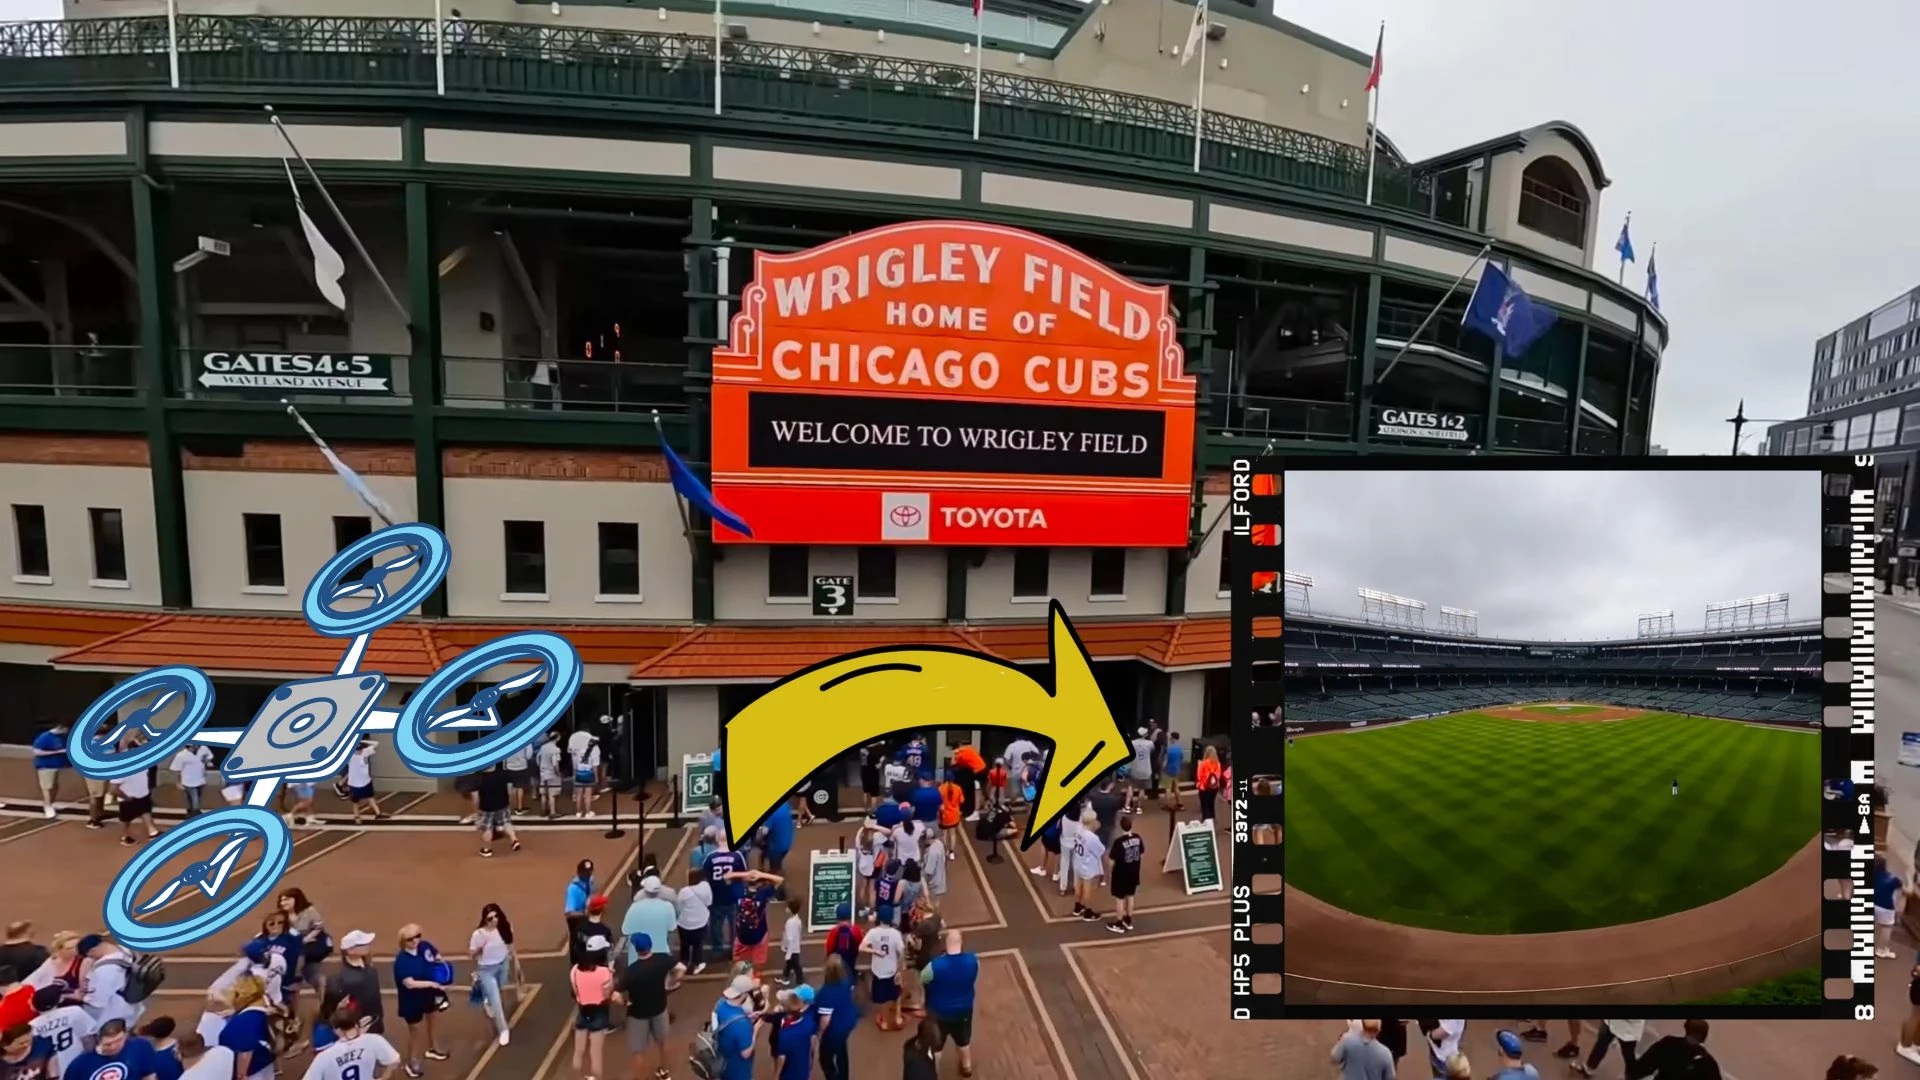 Chicago Cubs on X: The Friendly Chompfines. 🦈 RT for a chance to